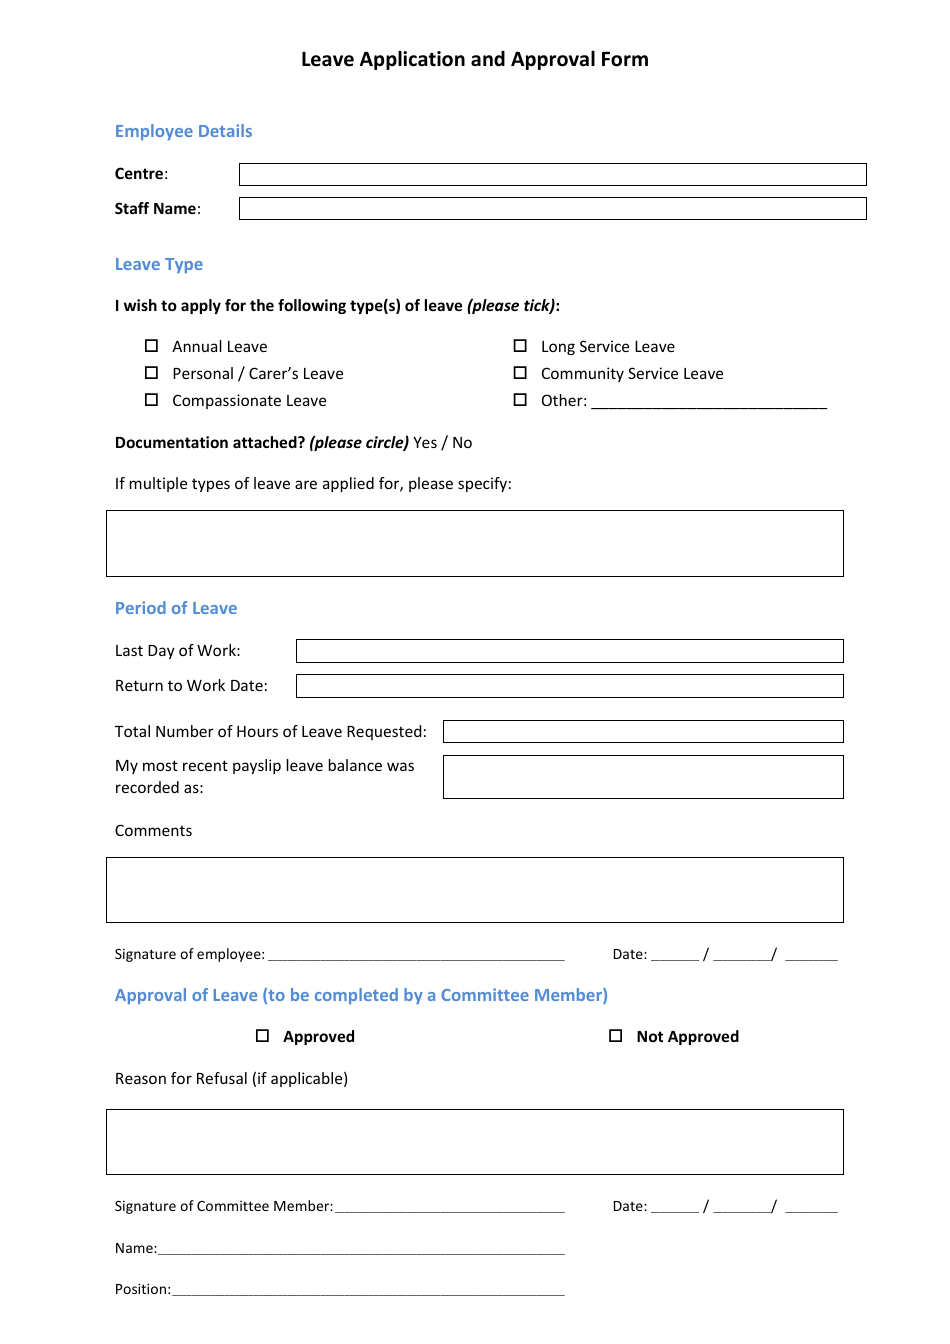 Leave Application and Approval Form, Page 1